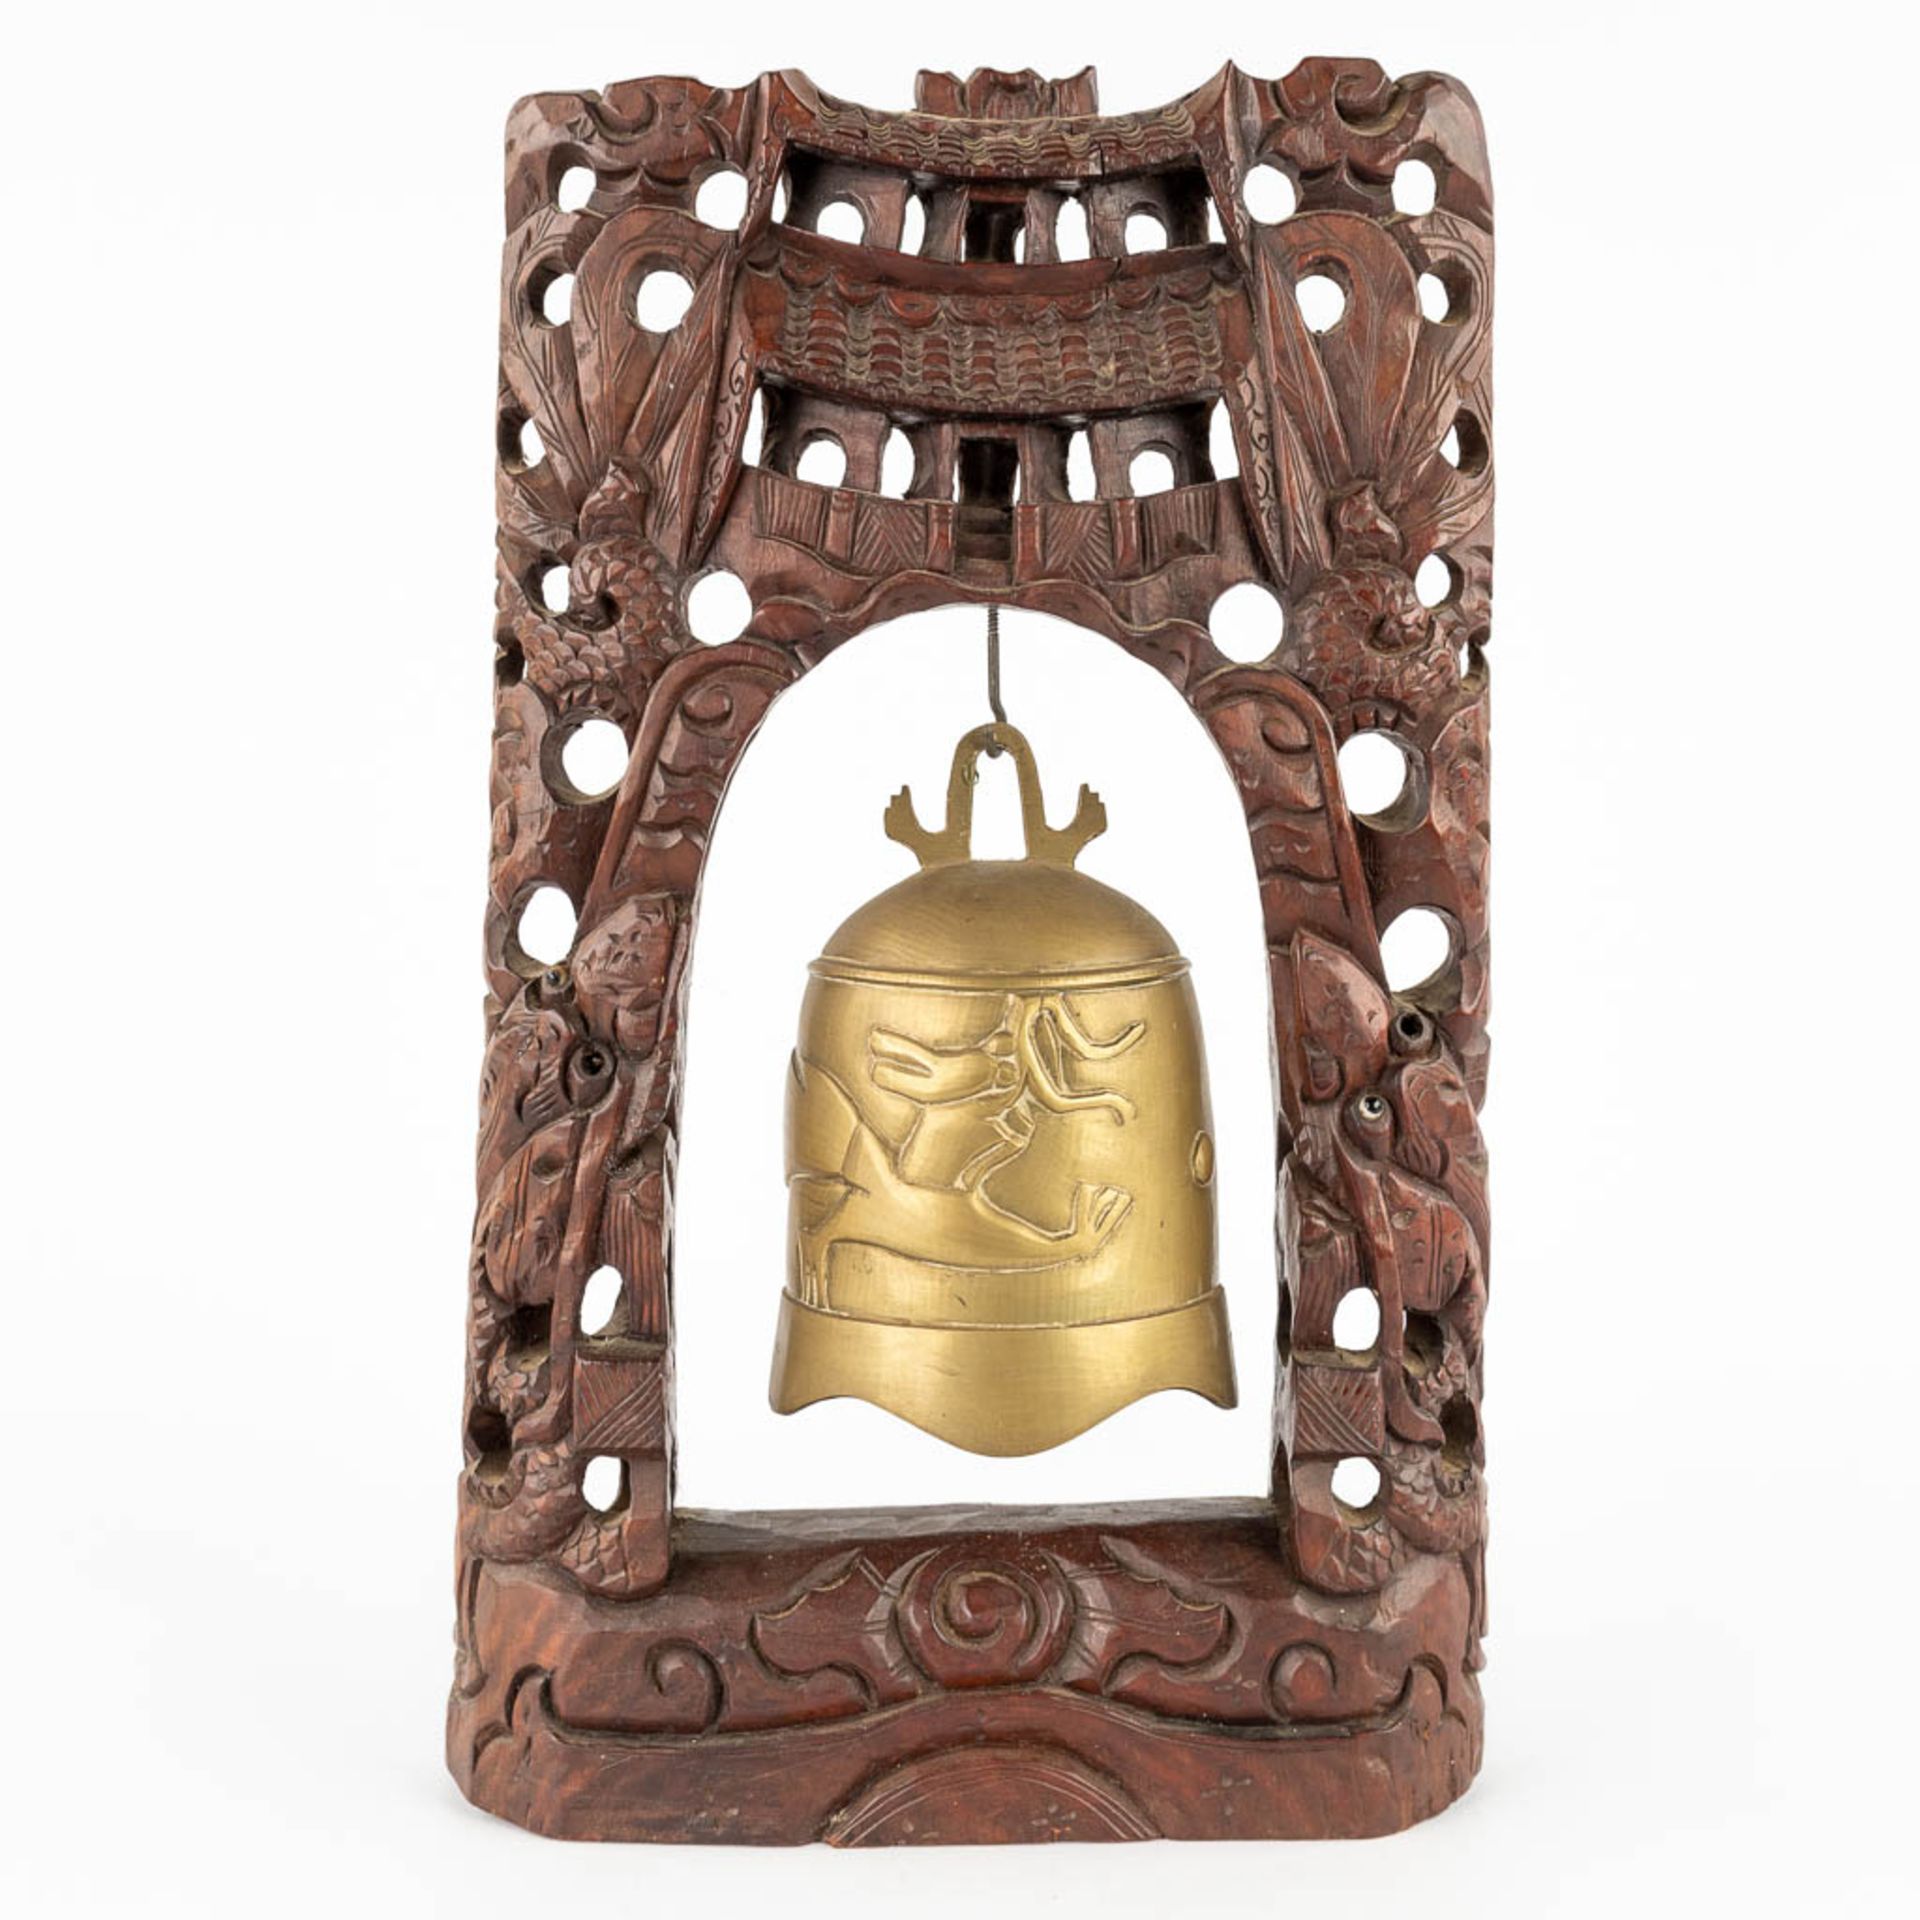 3 bells and a gong, Oriental. 19th/20th C. (L:13 x W:47 x H:55 cm) - Image 18 of 28